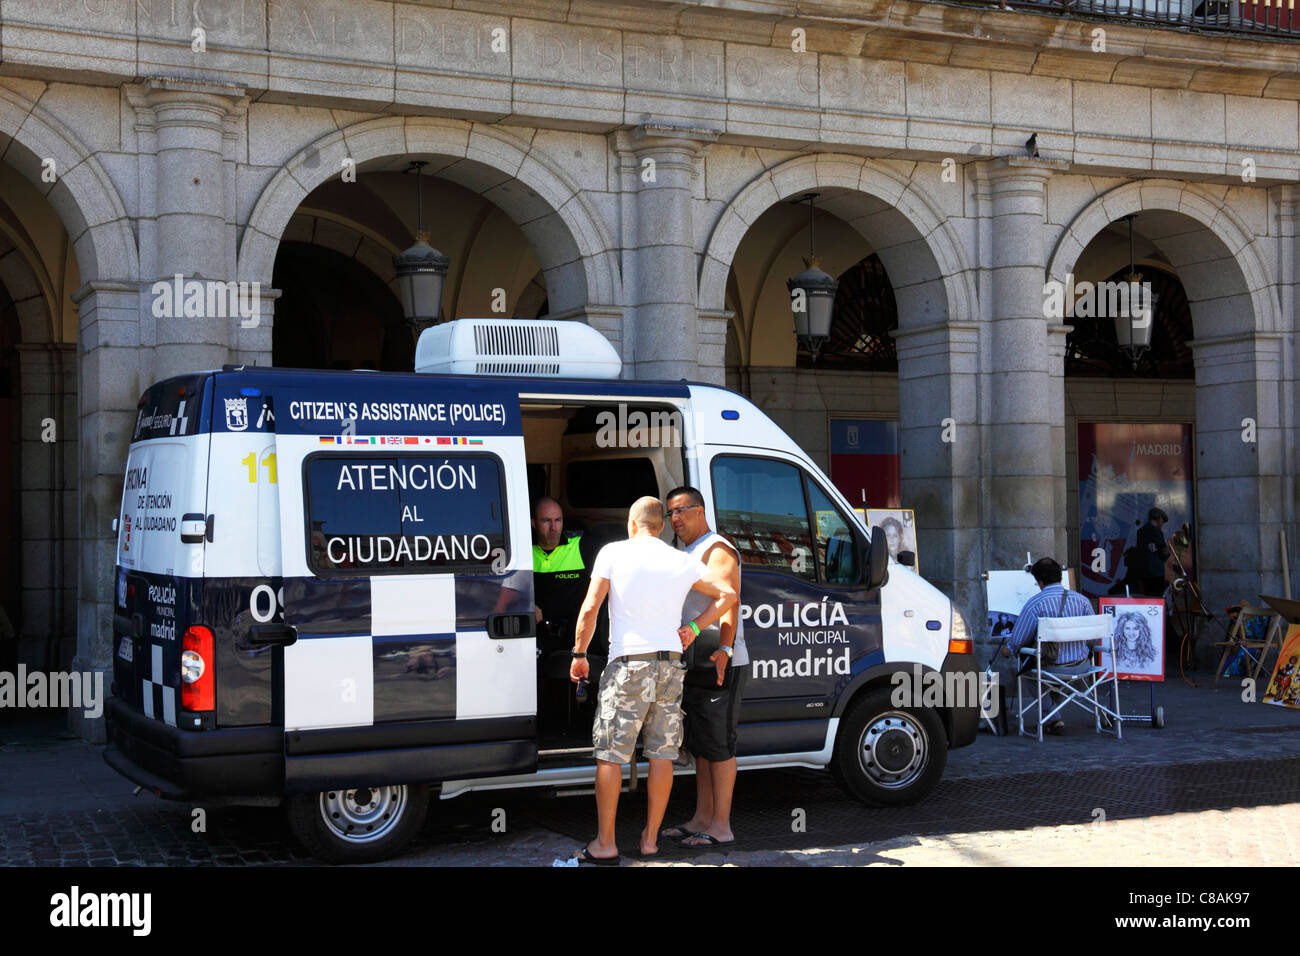 Citizens Assistance police van helping tourists in Plaza Mayor , Madrid , Spain Stock Photo